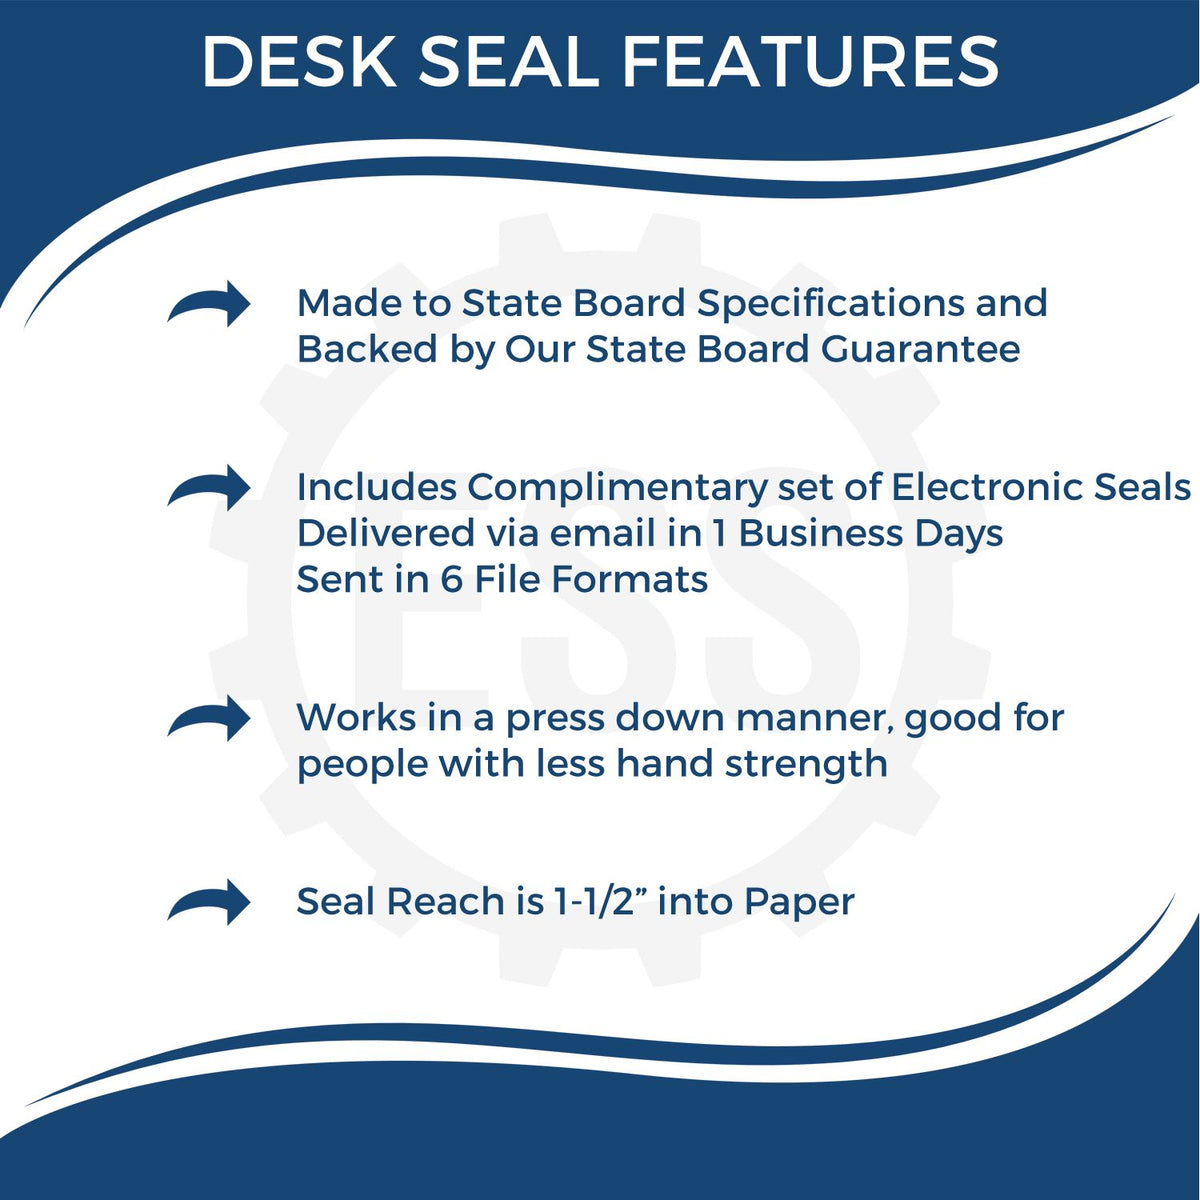 A picture of an infographic highlighting the selling points for the Maryland Desk Architect Embossing Seal